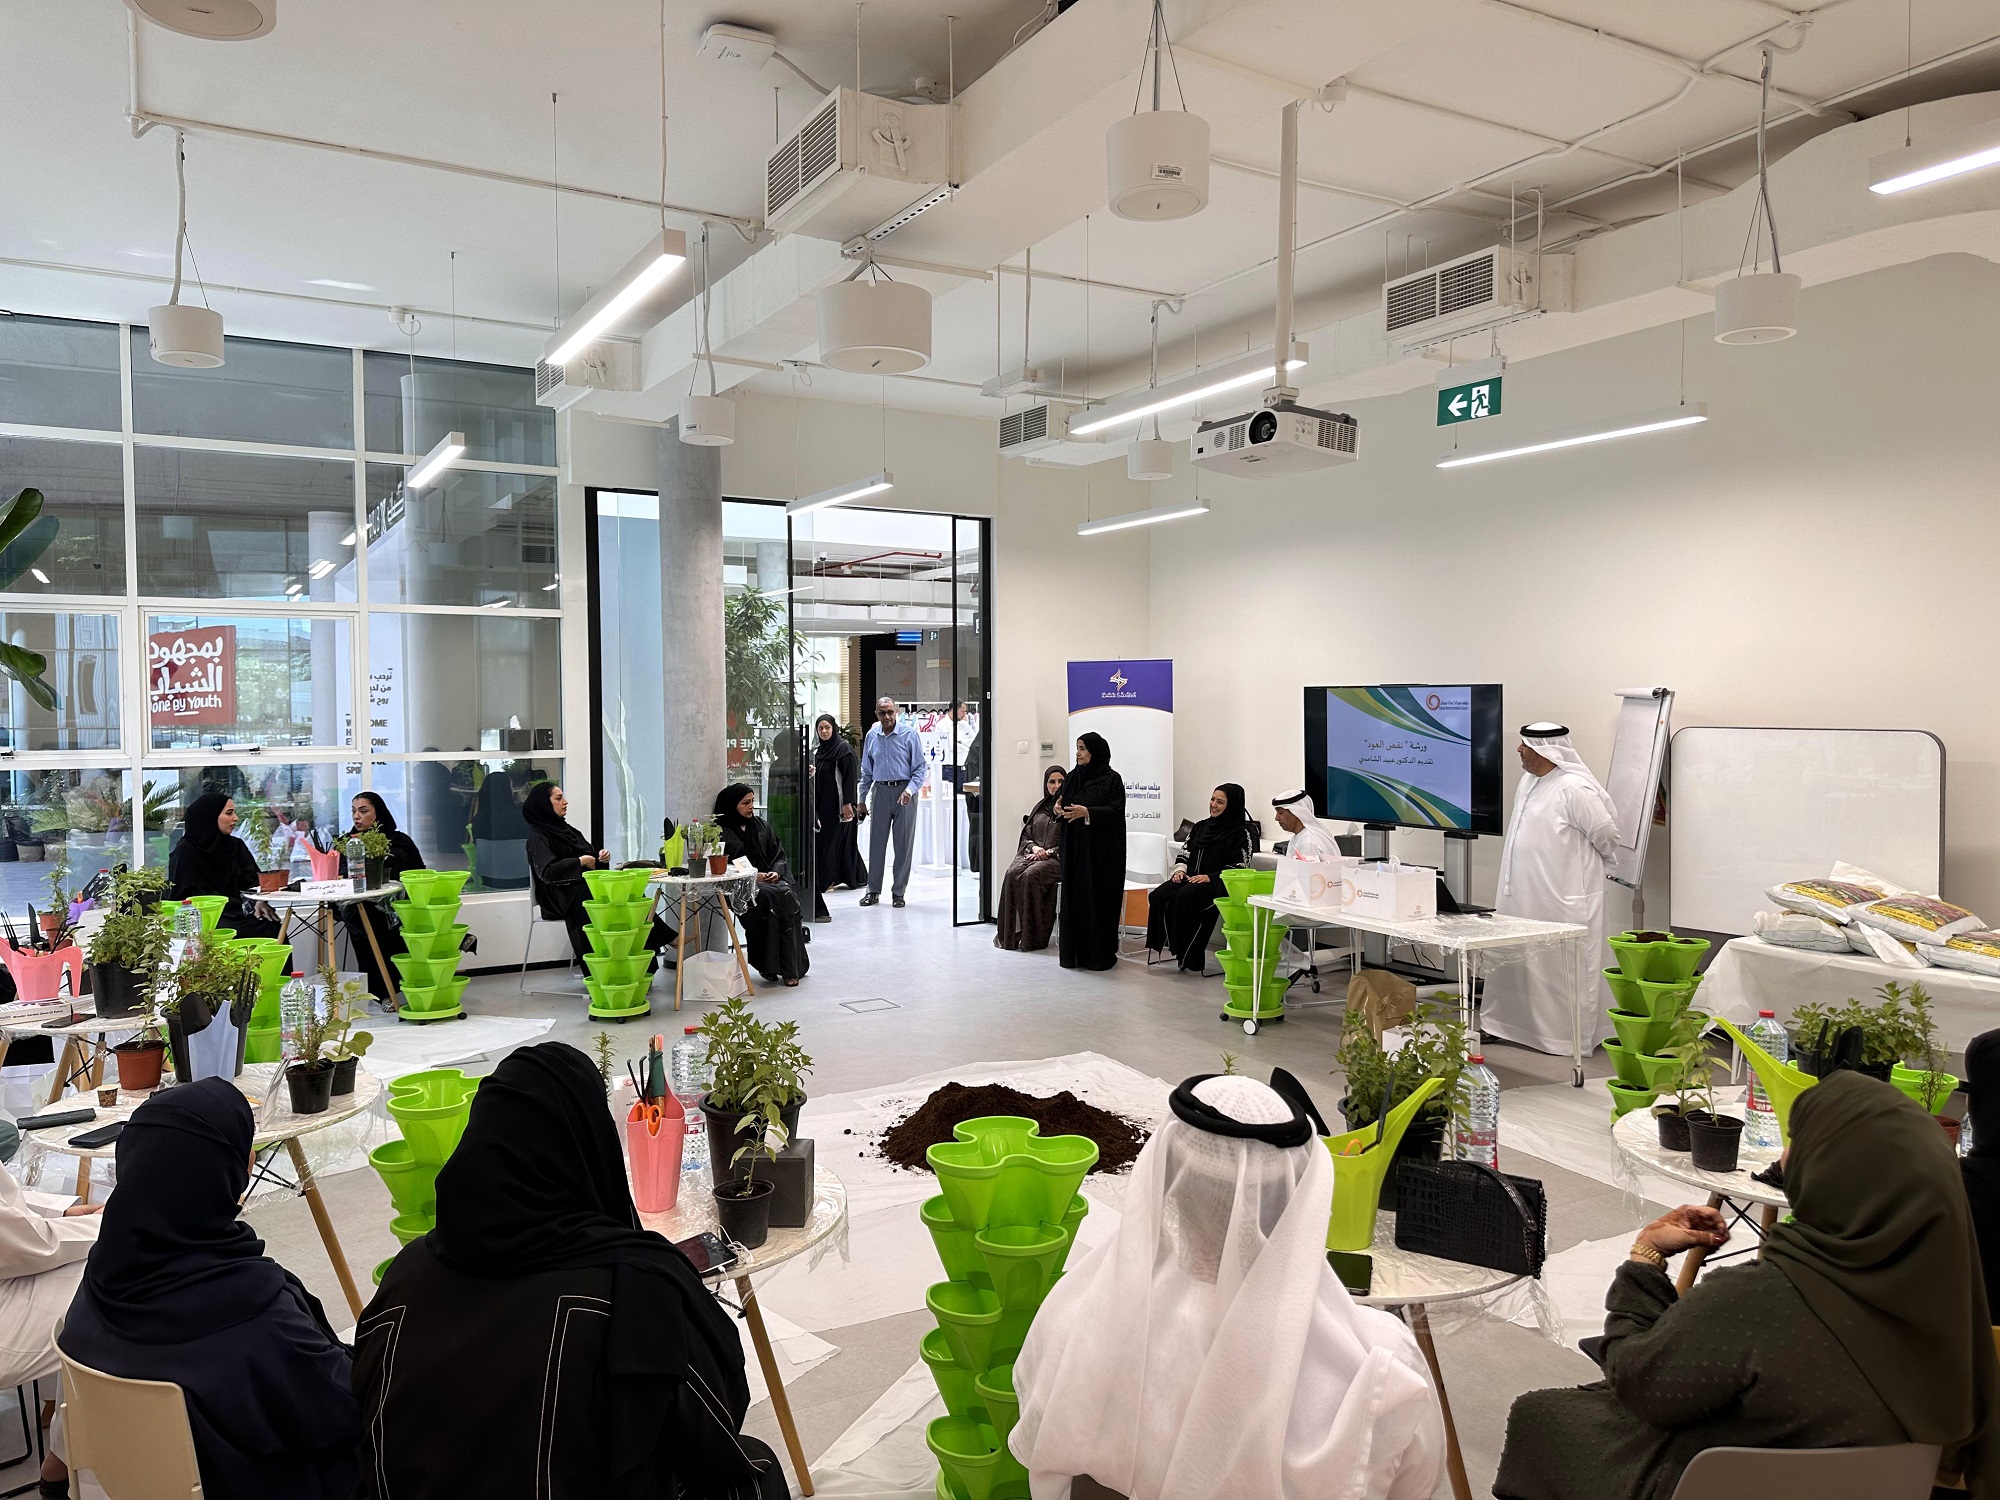 “Naqd Al Oud” workshop to explain modern agricultural techniques within the “Plant and Reap” initiative